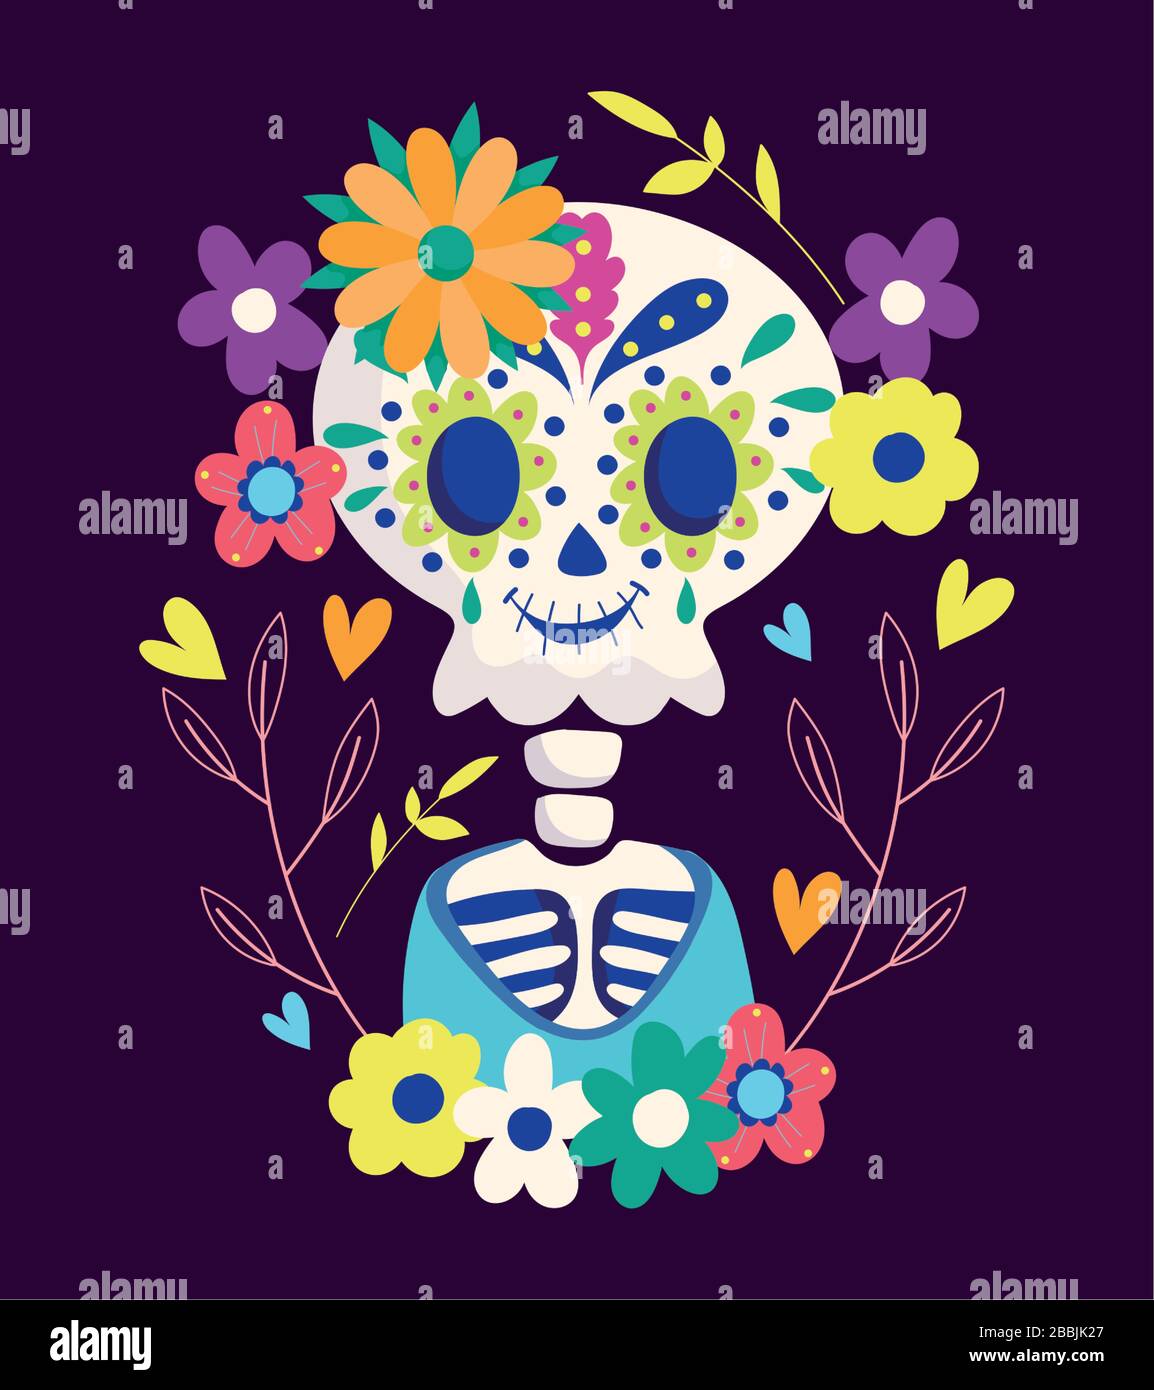 day of the dead, skeleton flowers festive traditional mexican ...